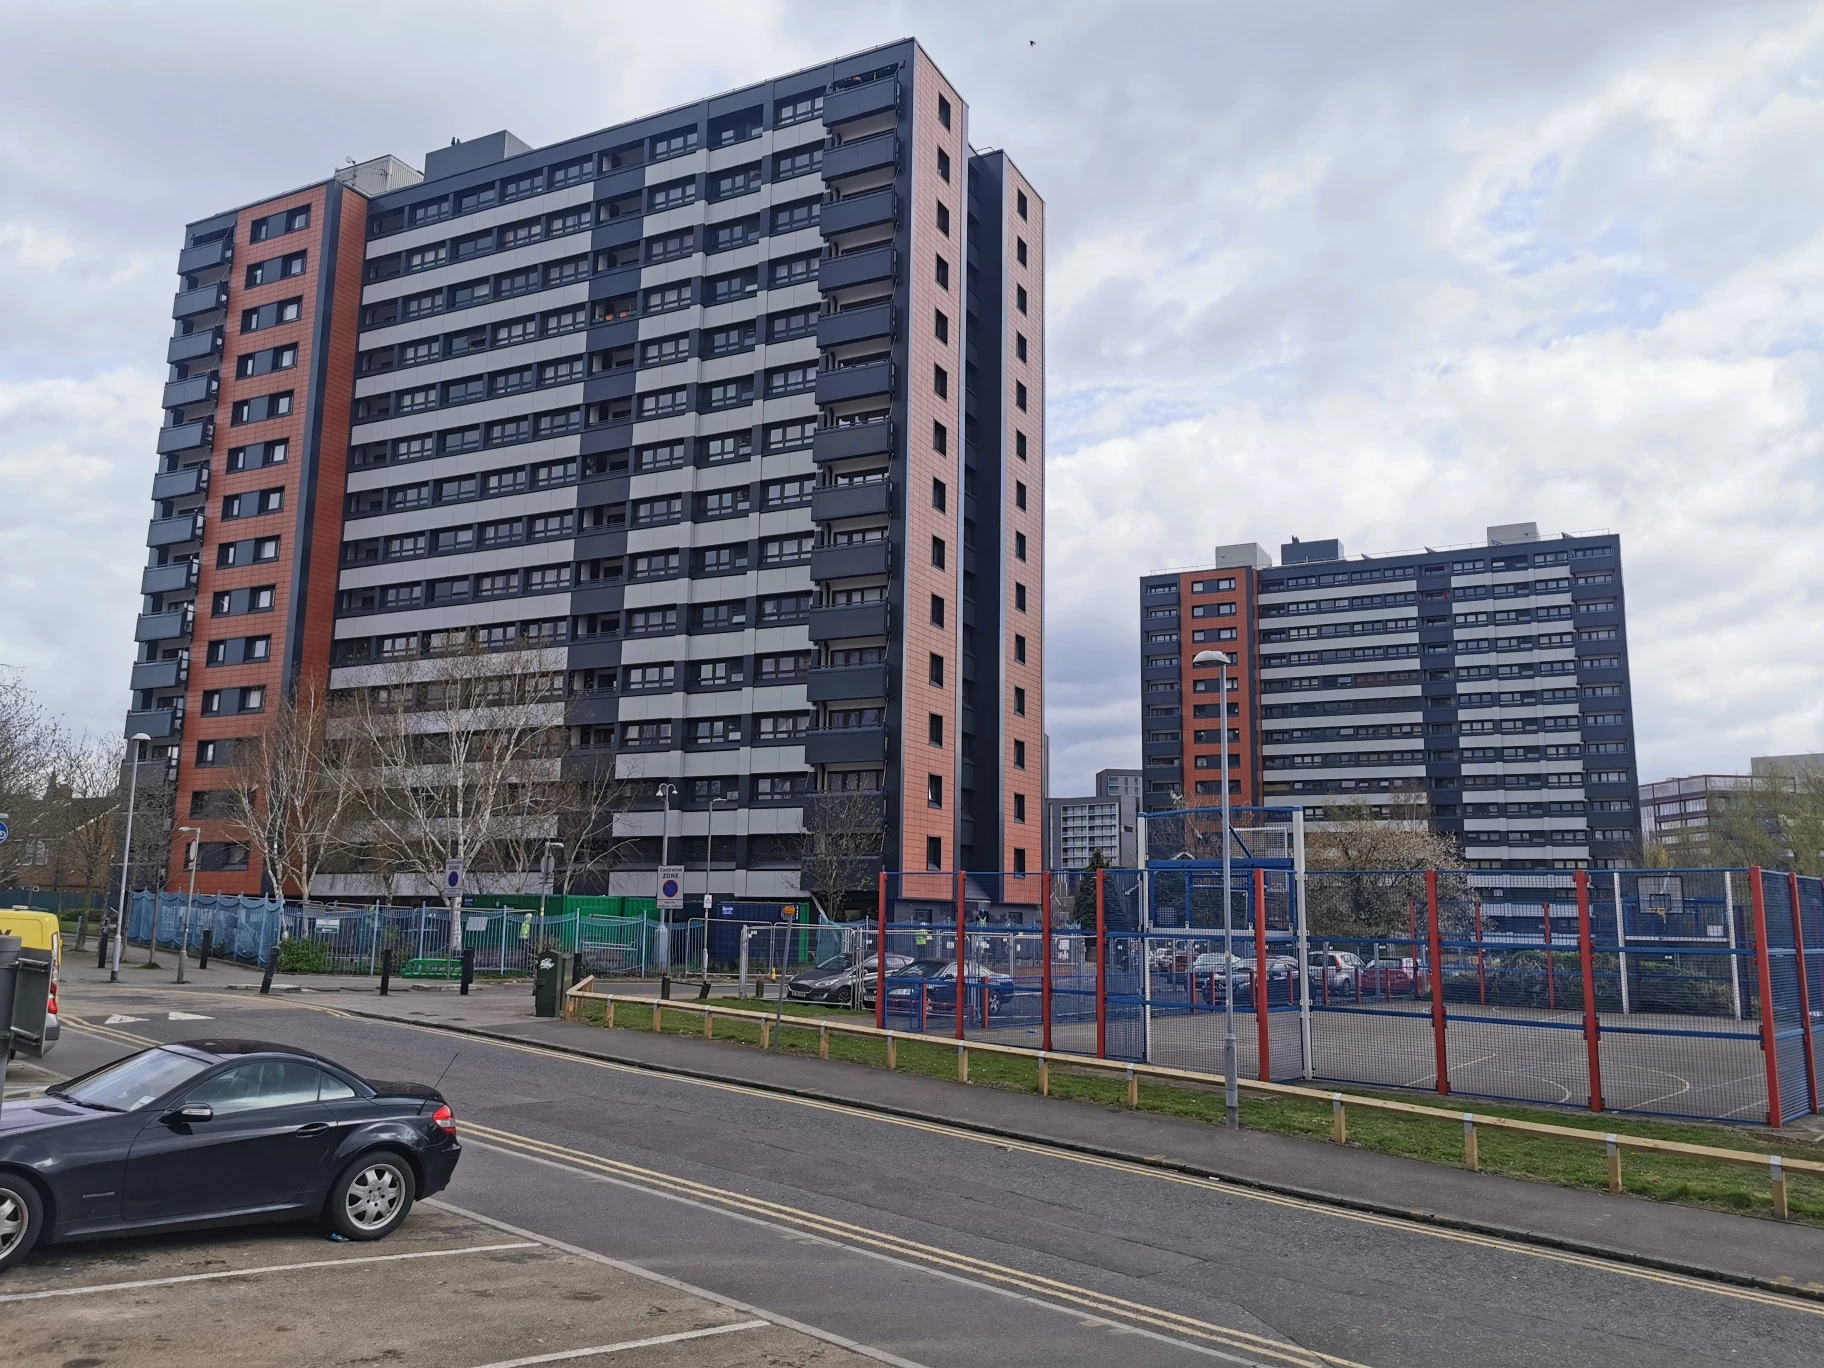 Arthur Millwood and Canon Hussey Court in Salford